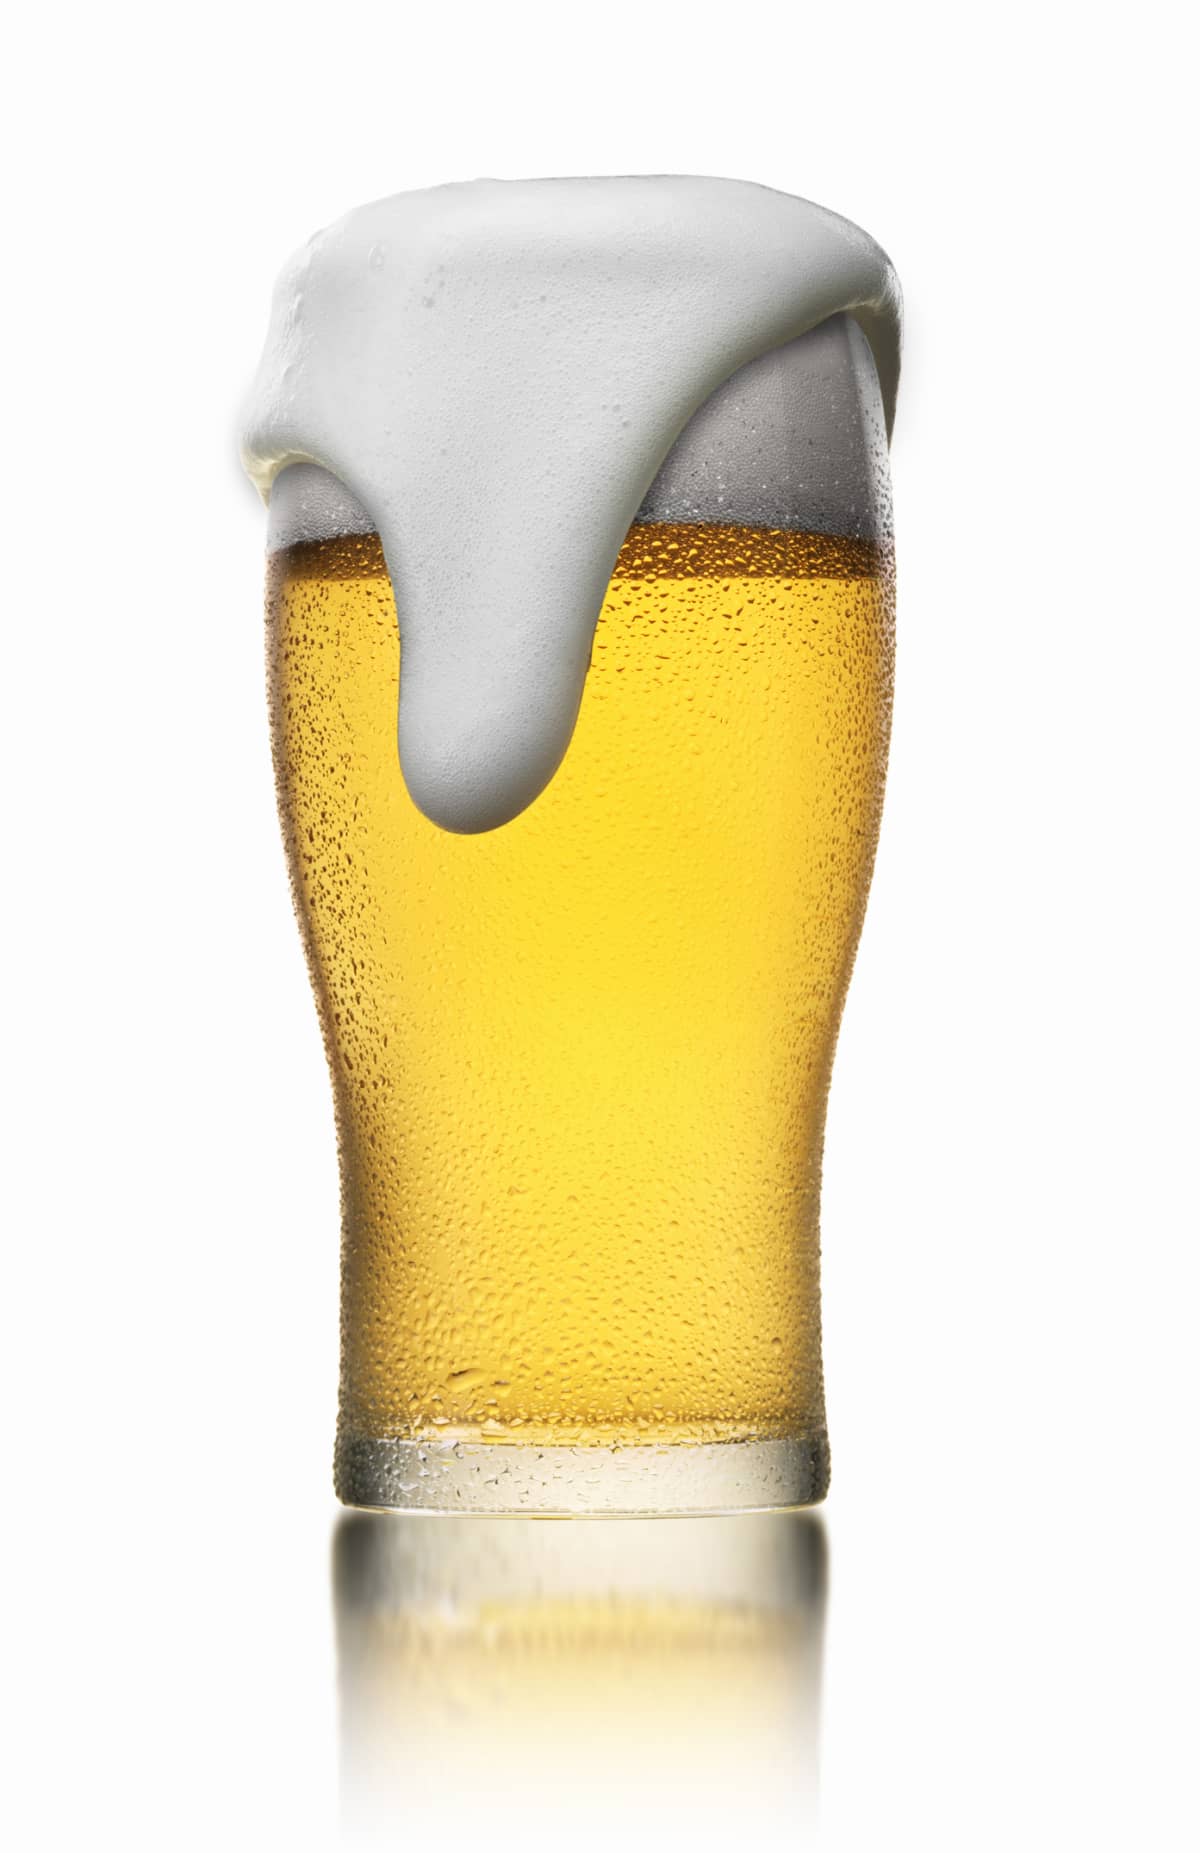 Chilled glass of beer against a white background